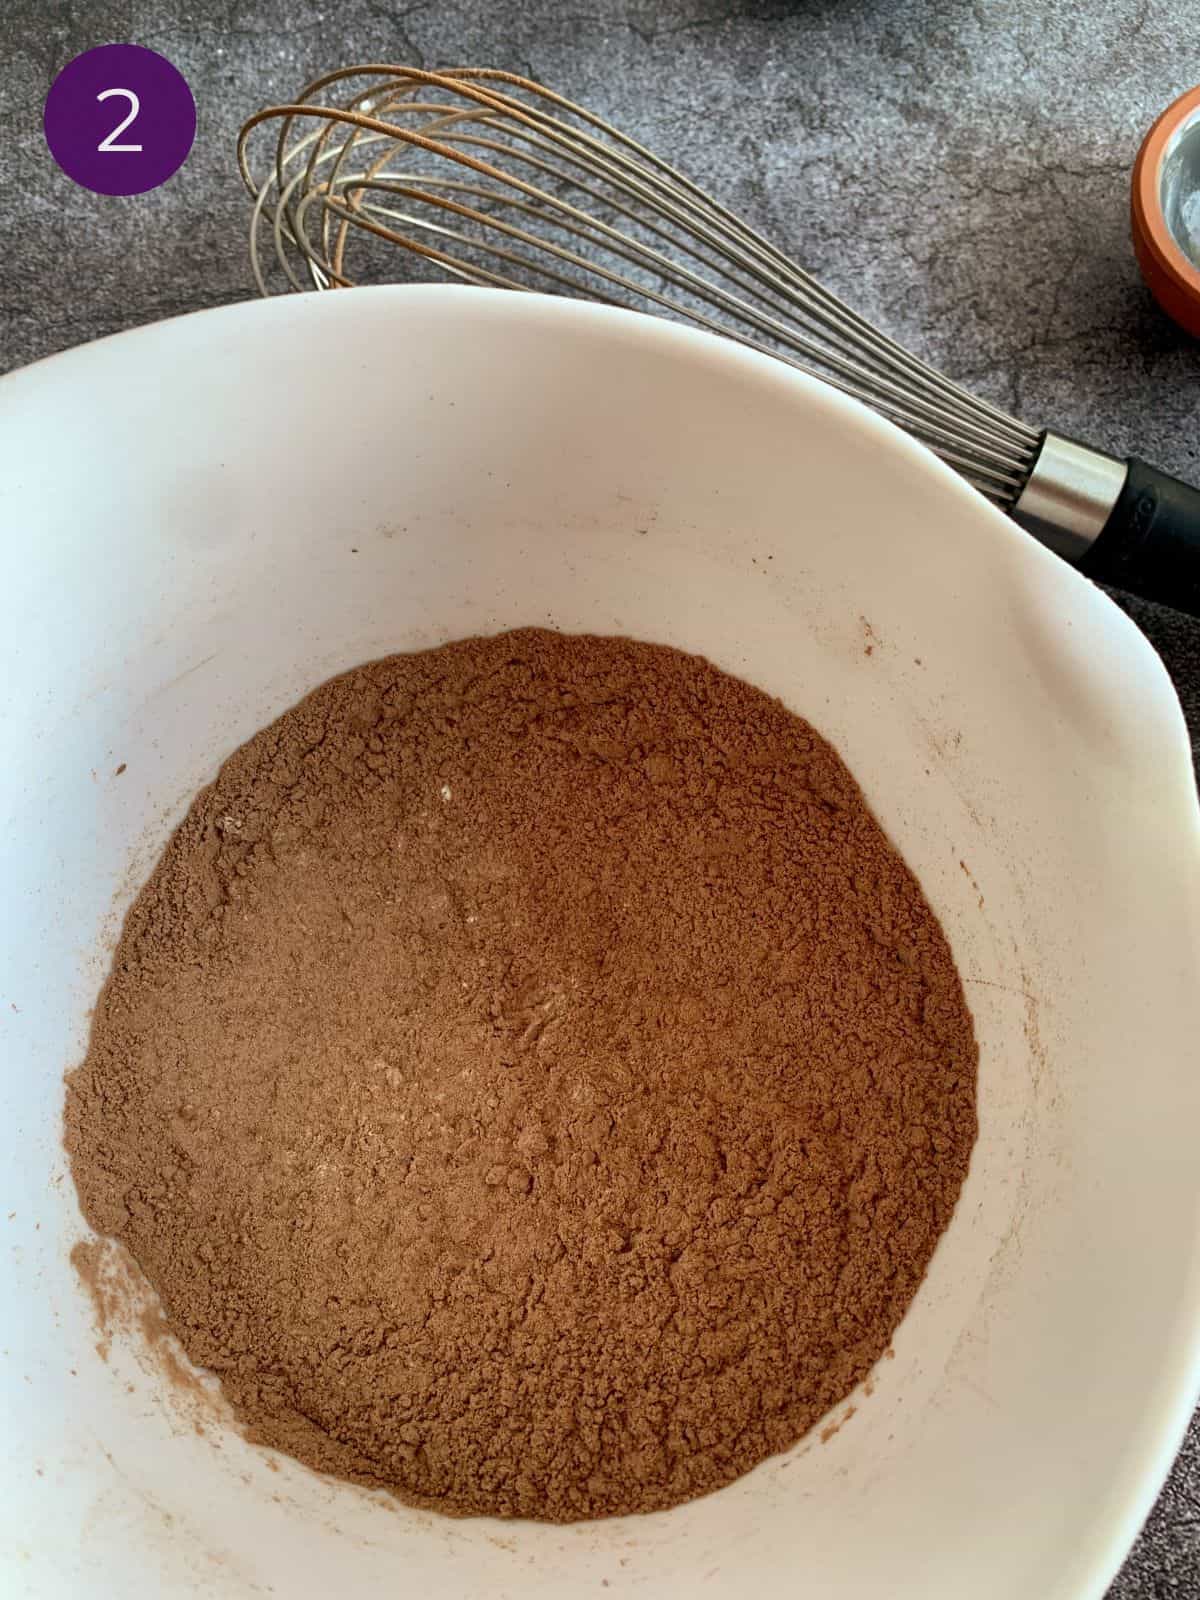 Dry ingredients whisked together in a white bowl with metal whisk.